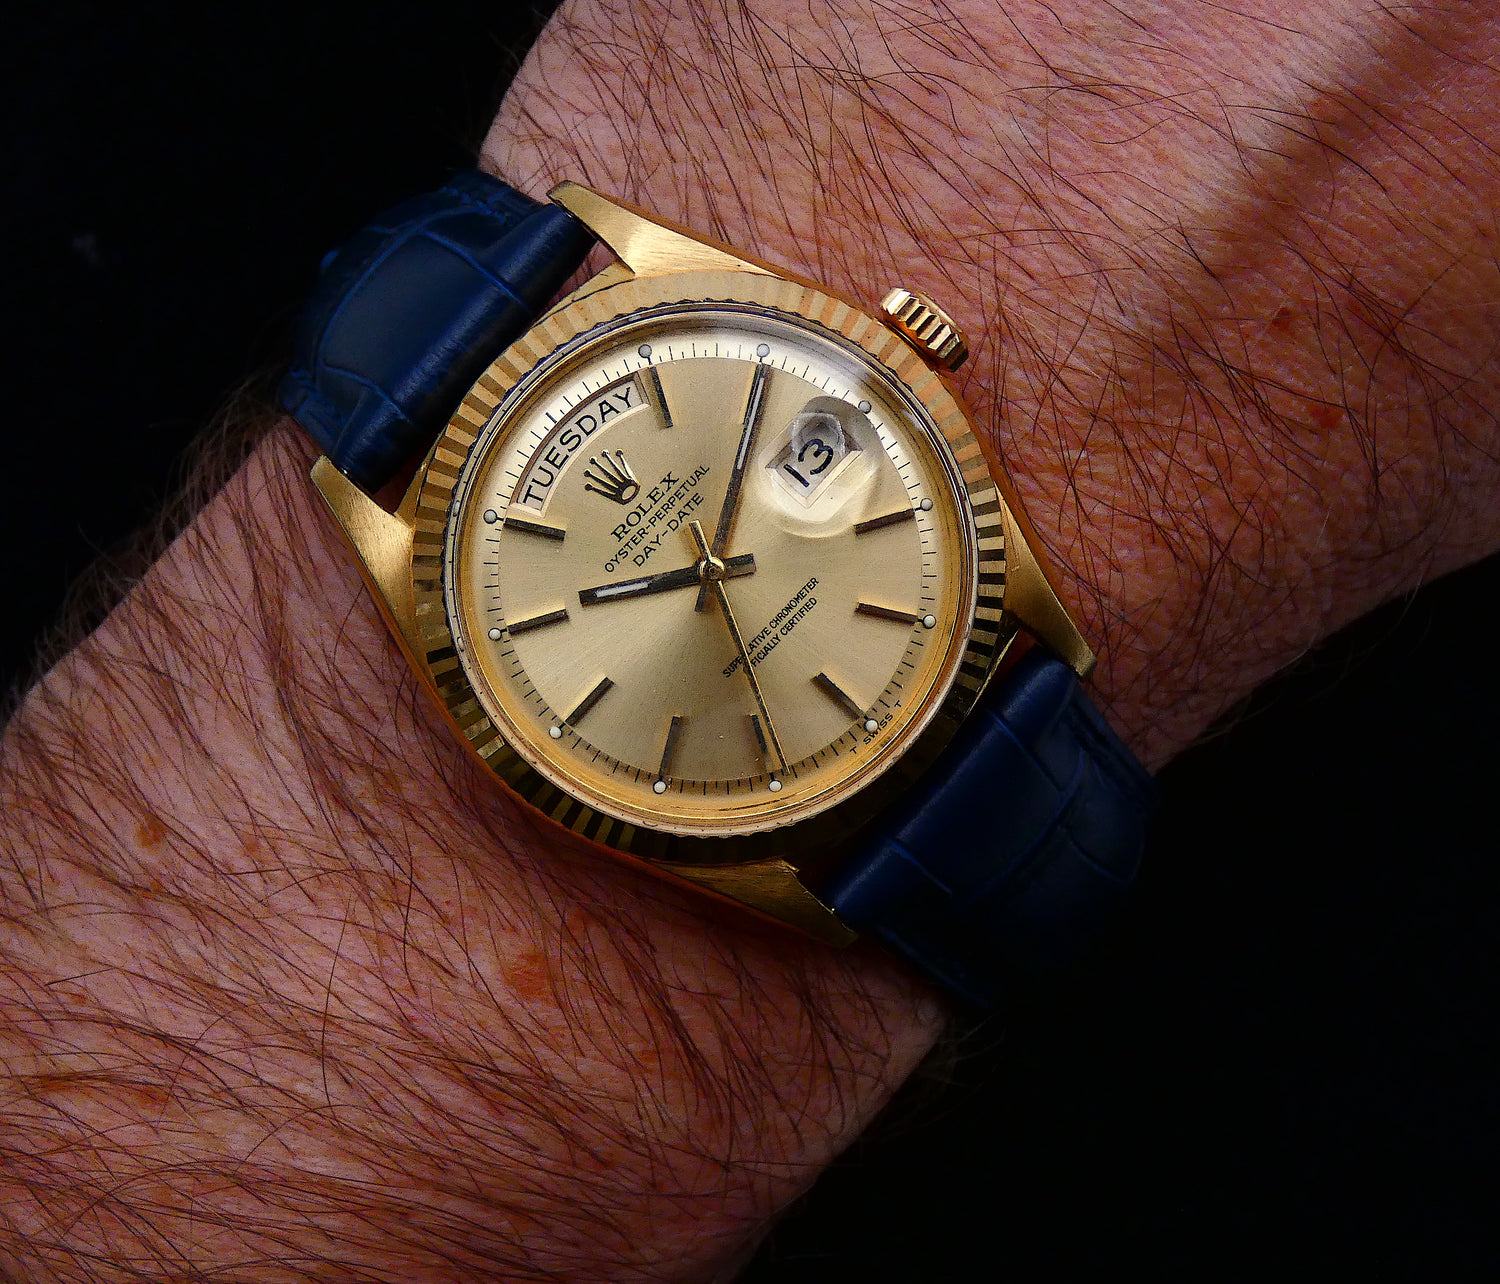 SOLD Rolex 1803 Day-Date 36 1966 / minty